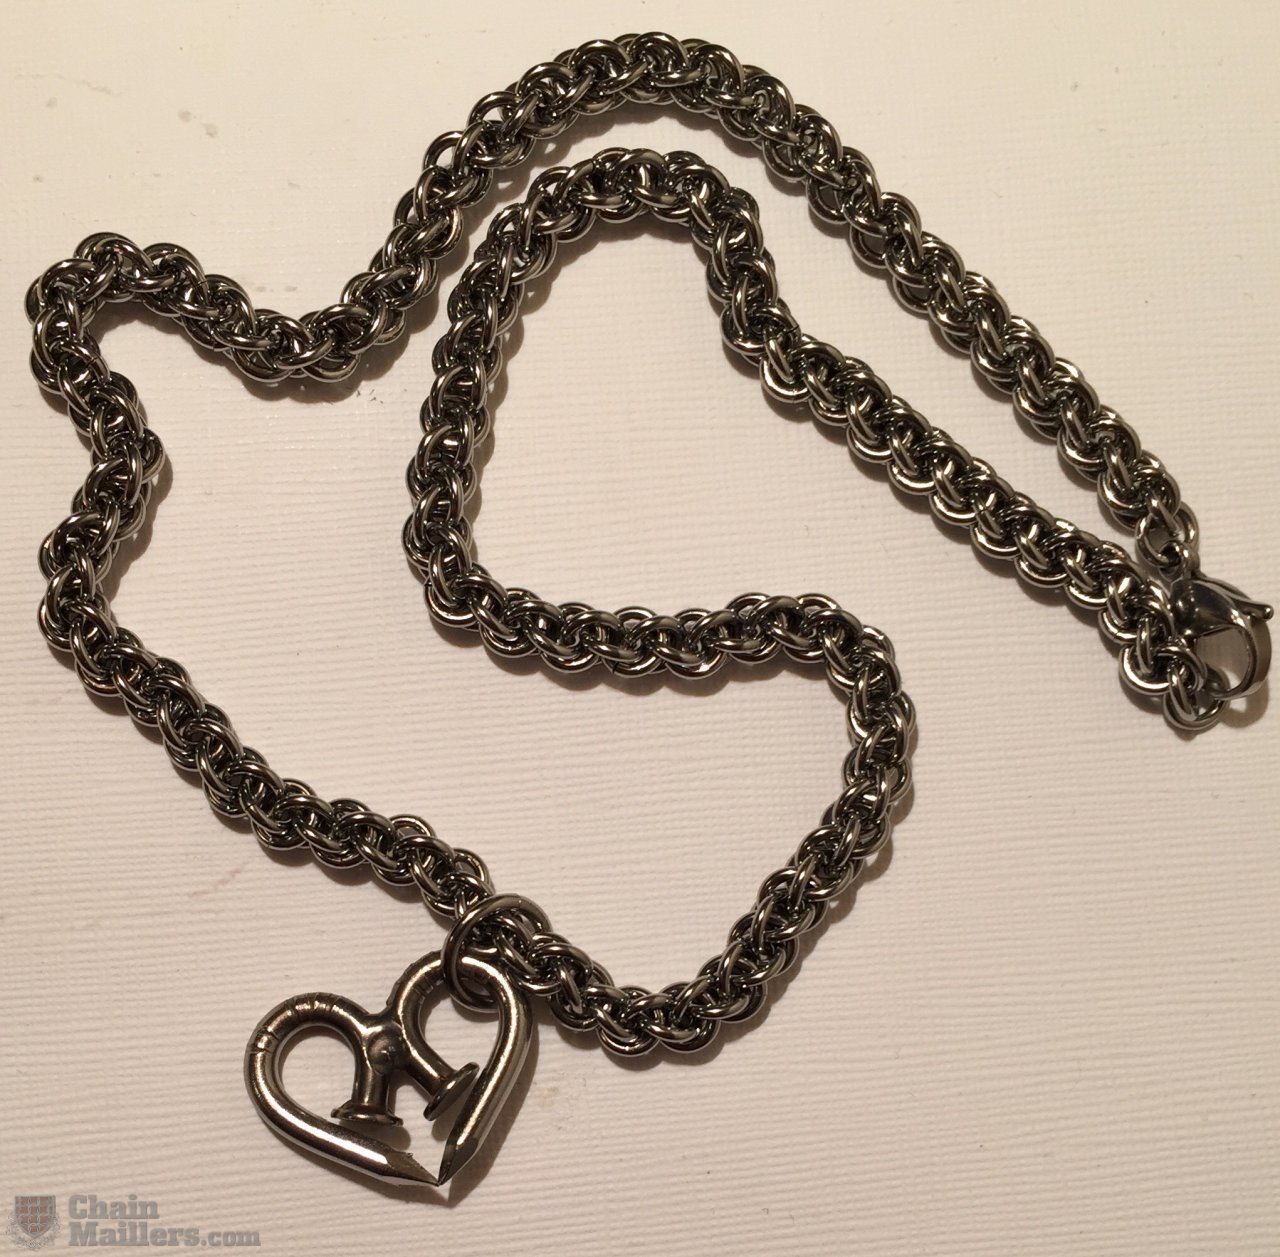 Nailmaille heart with JPL chain